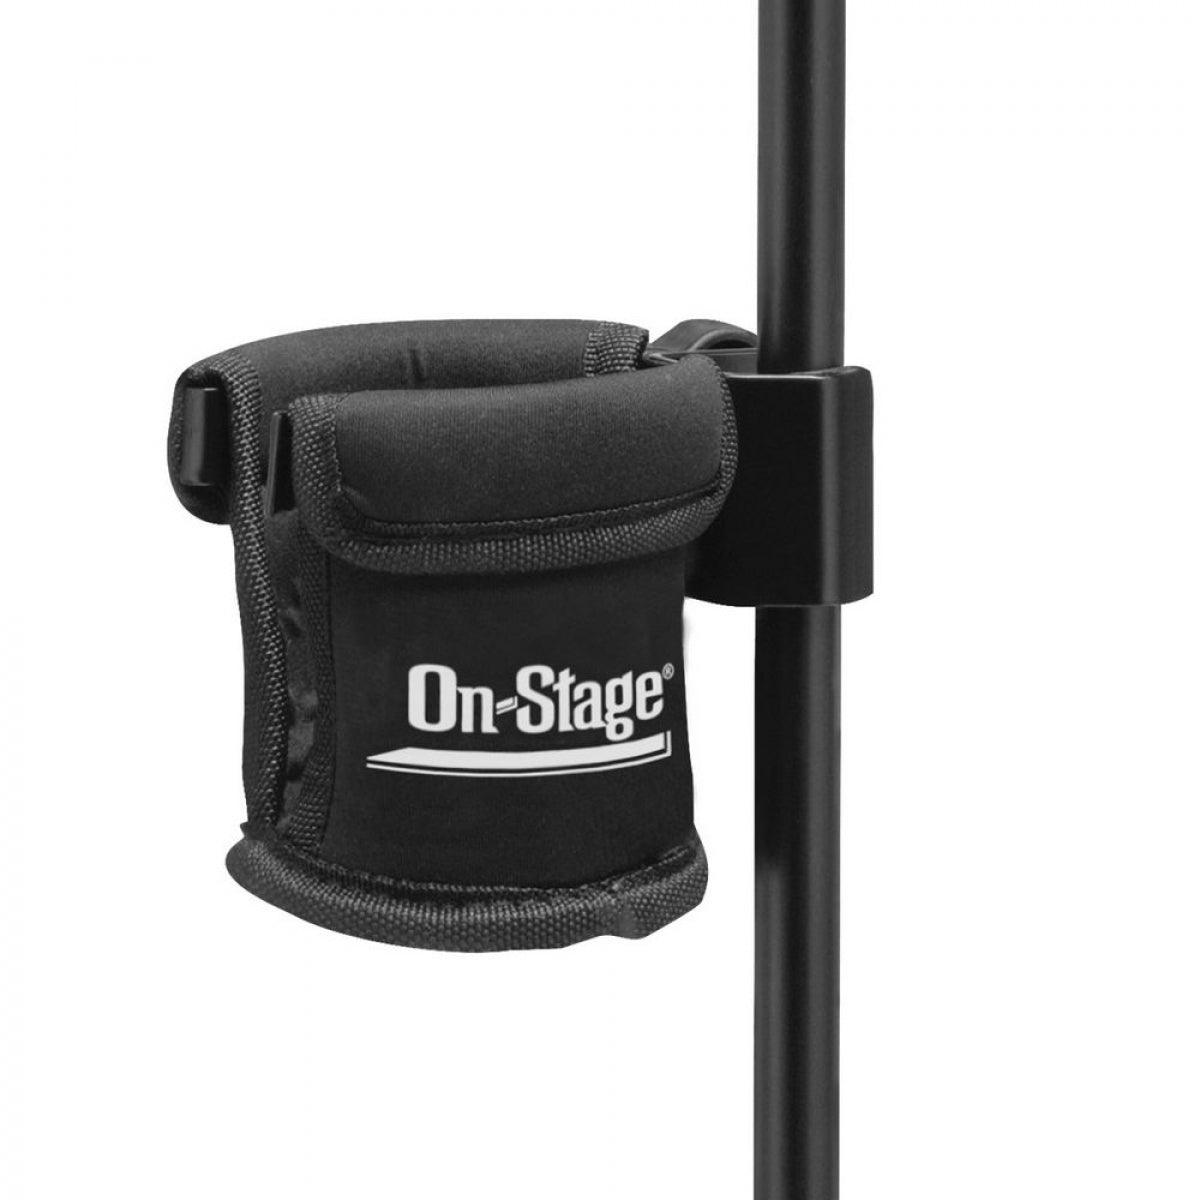 On-Stage Clamp-on Drink Holder - Impulse Music Co.